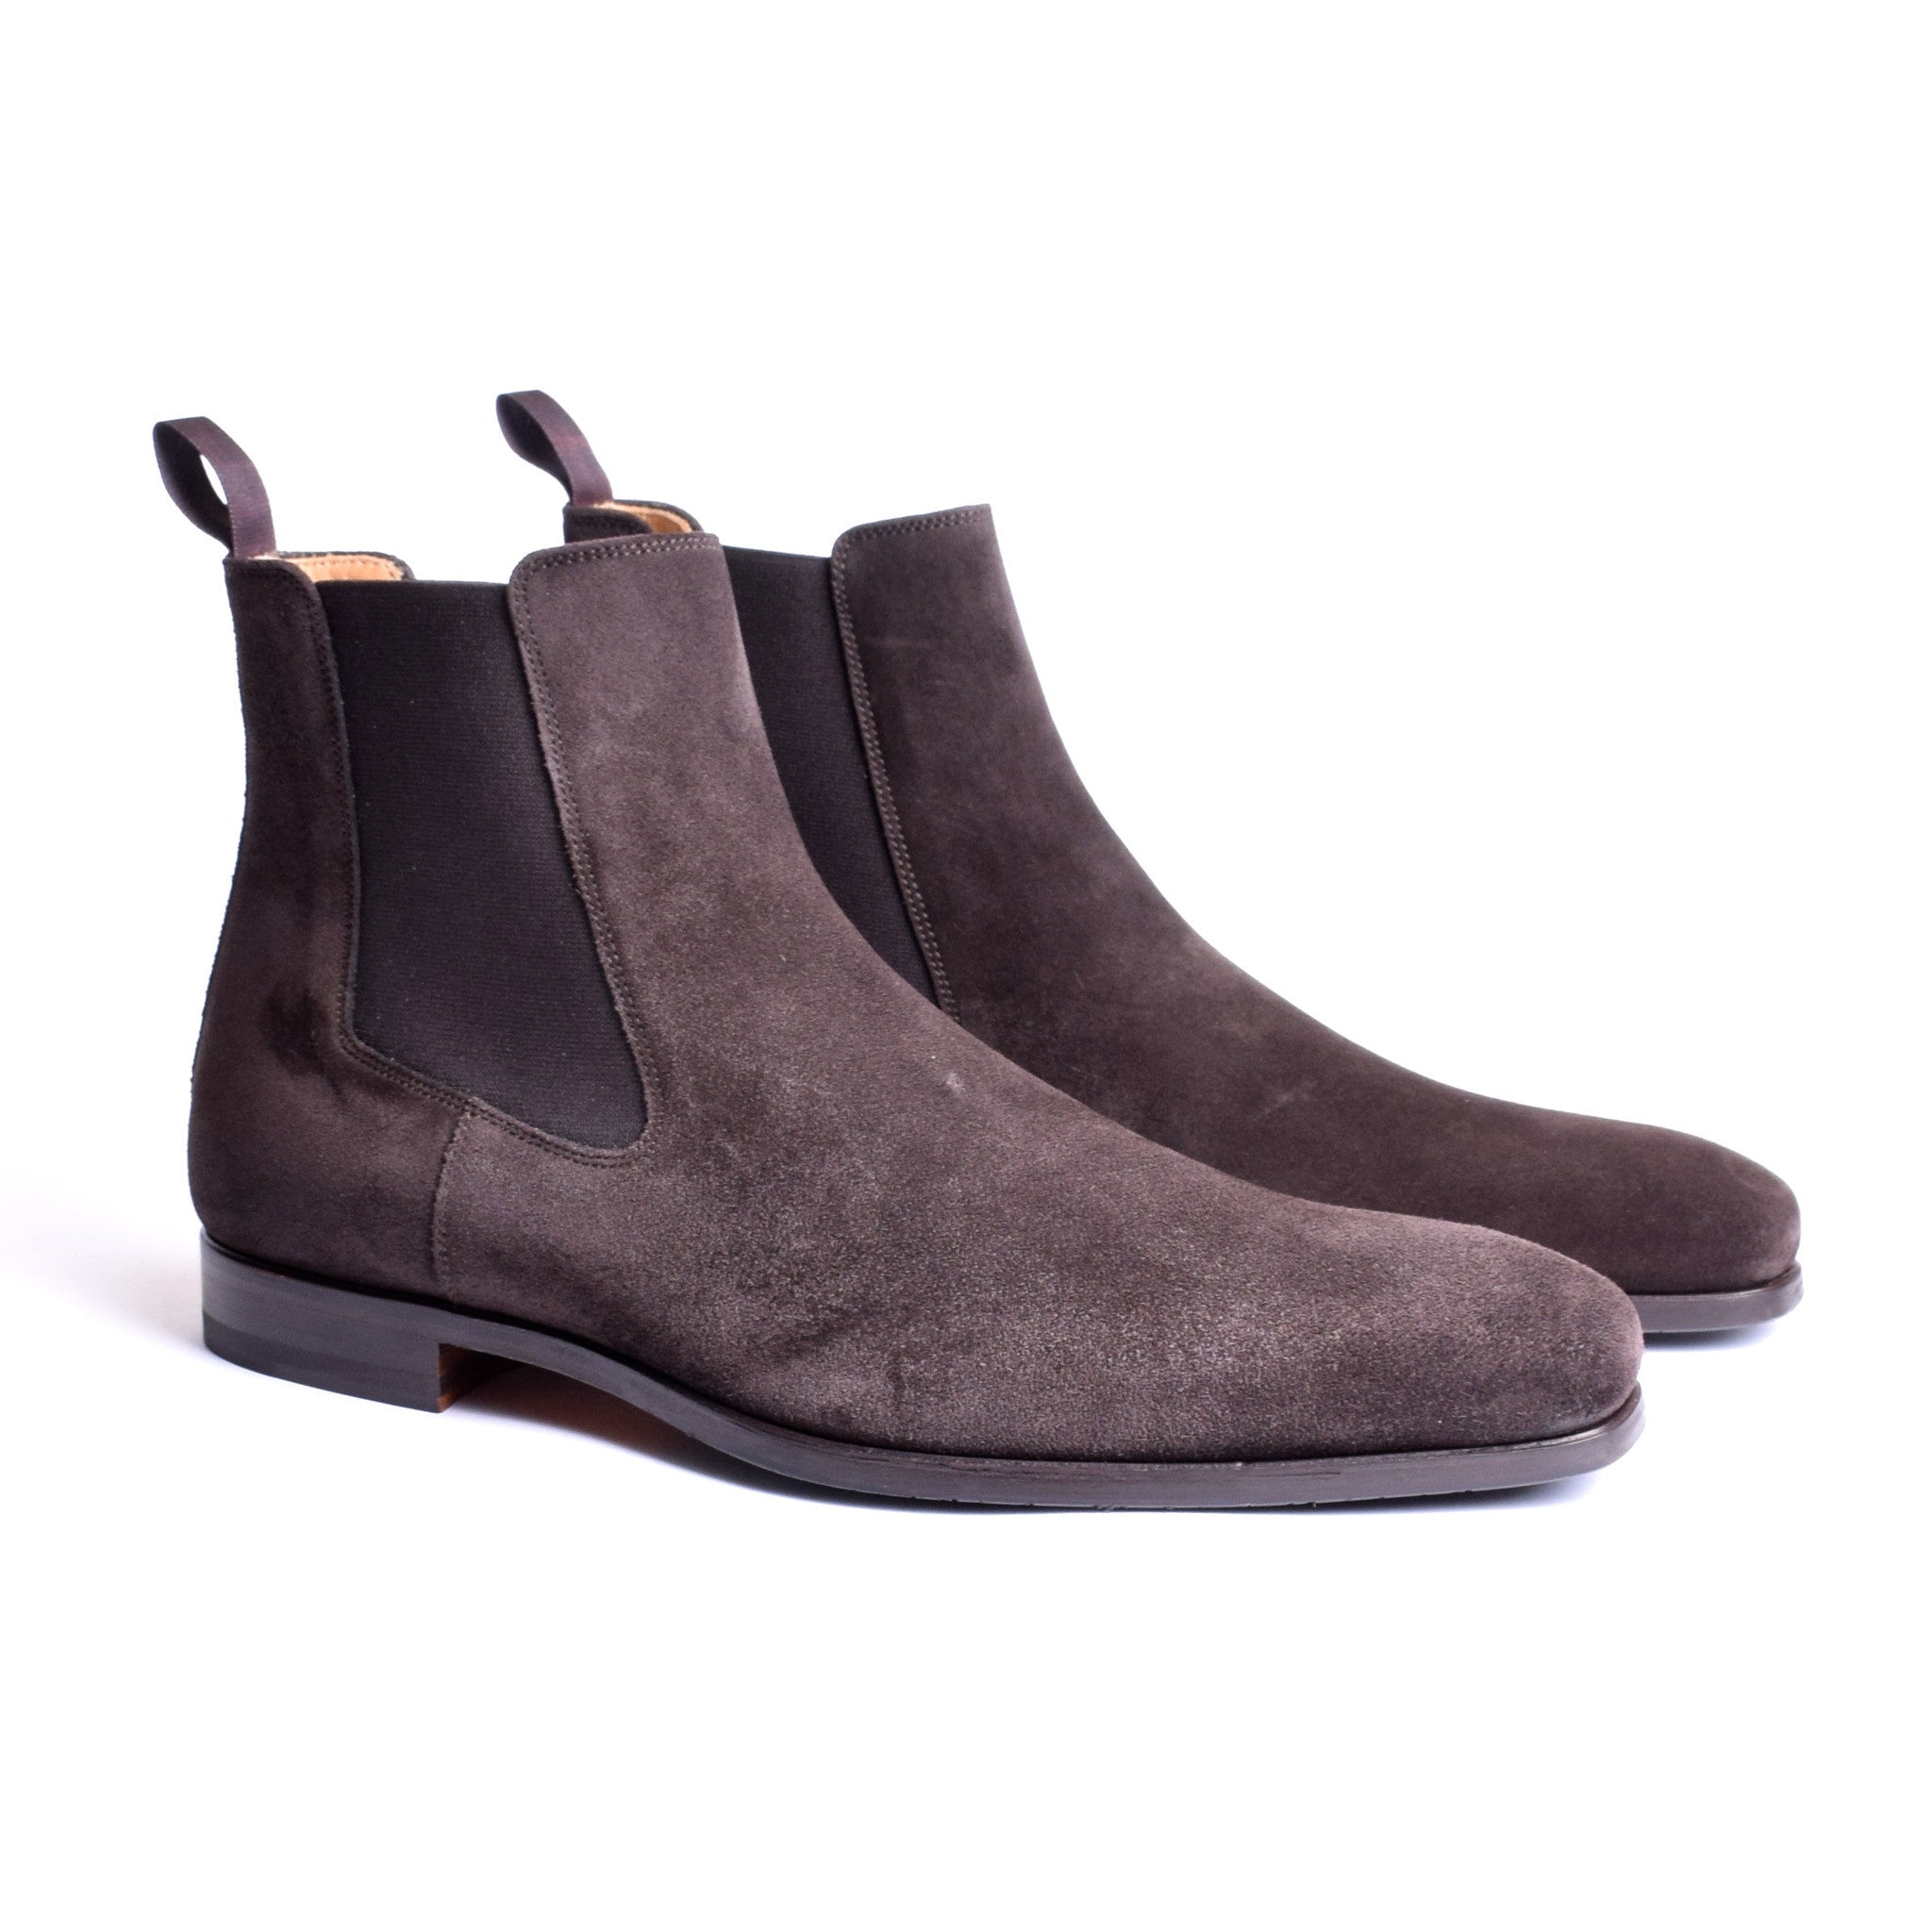 Suede Urban Charm: Magnanni Brown Suede Chelsea Boot